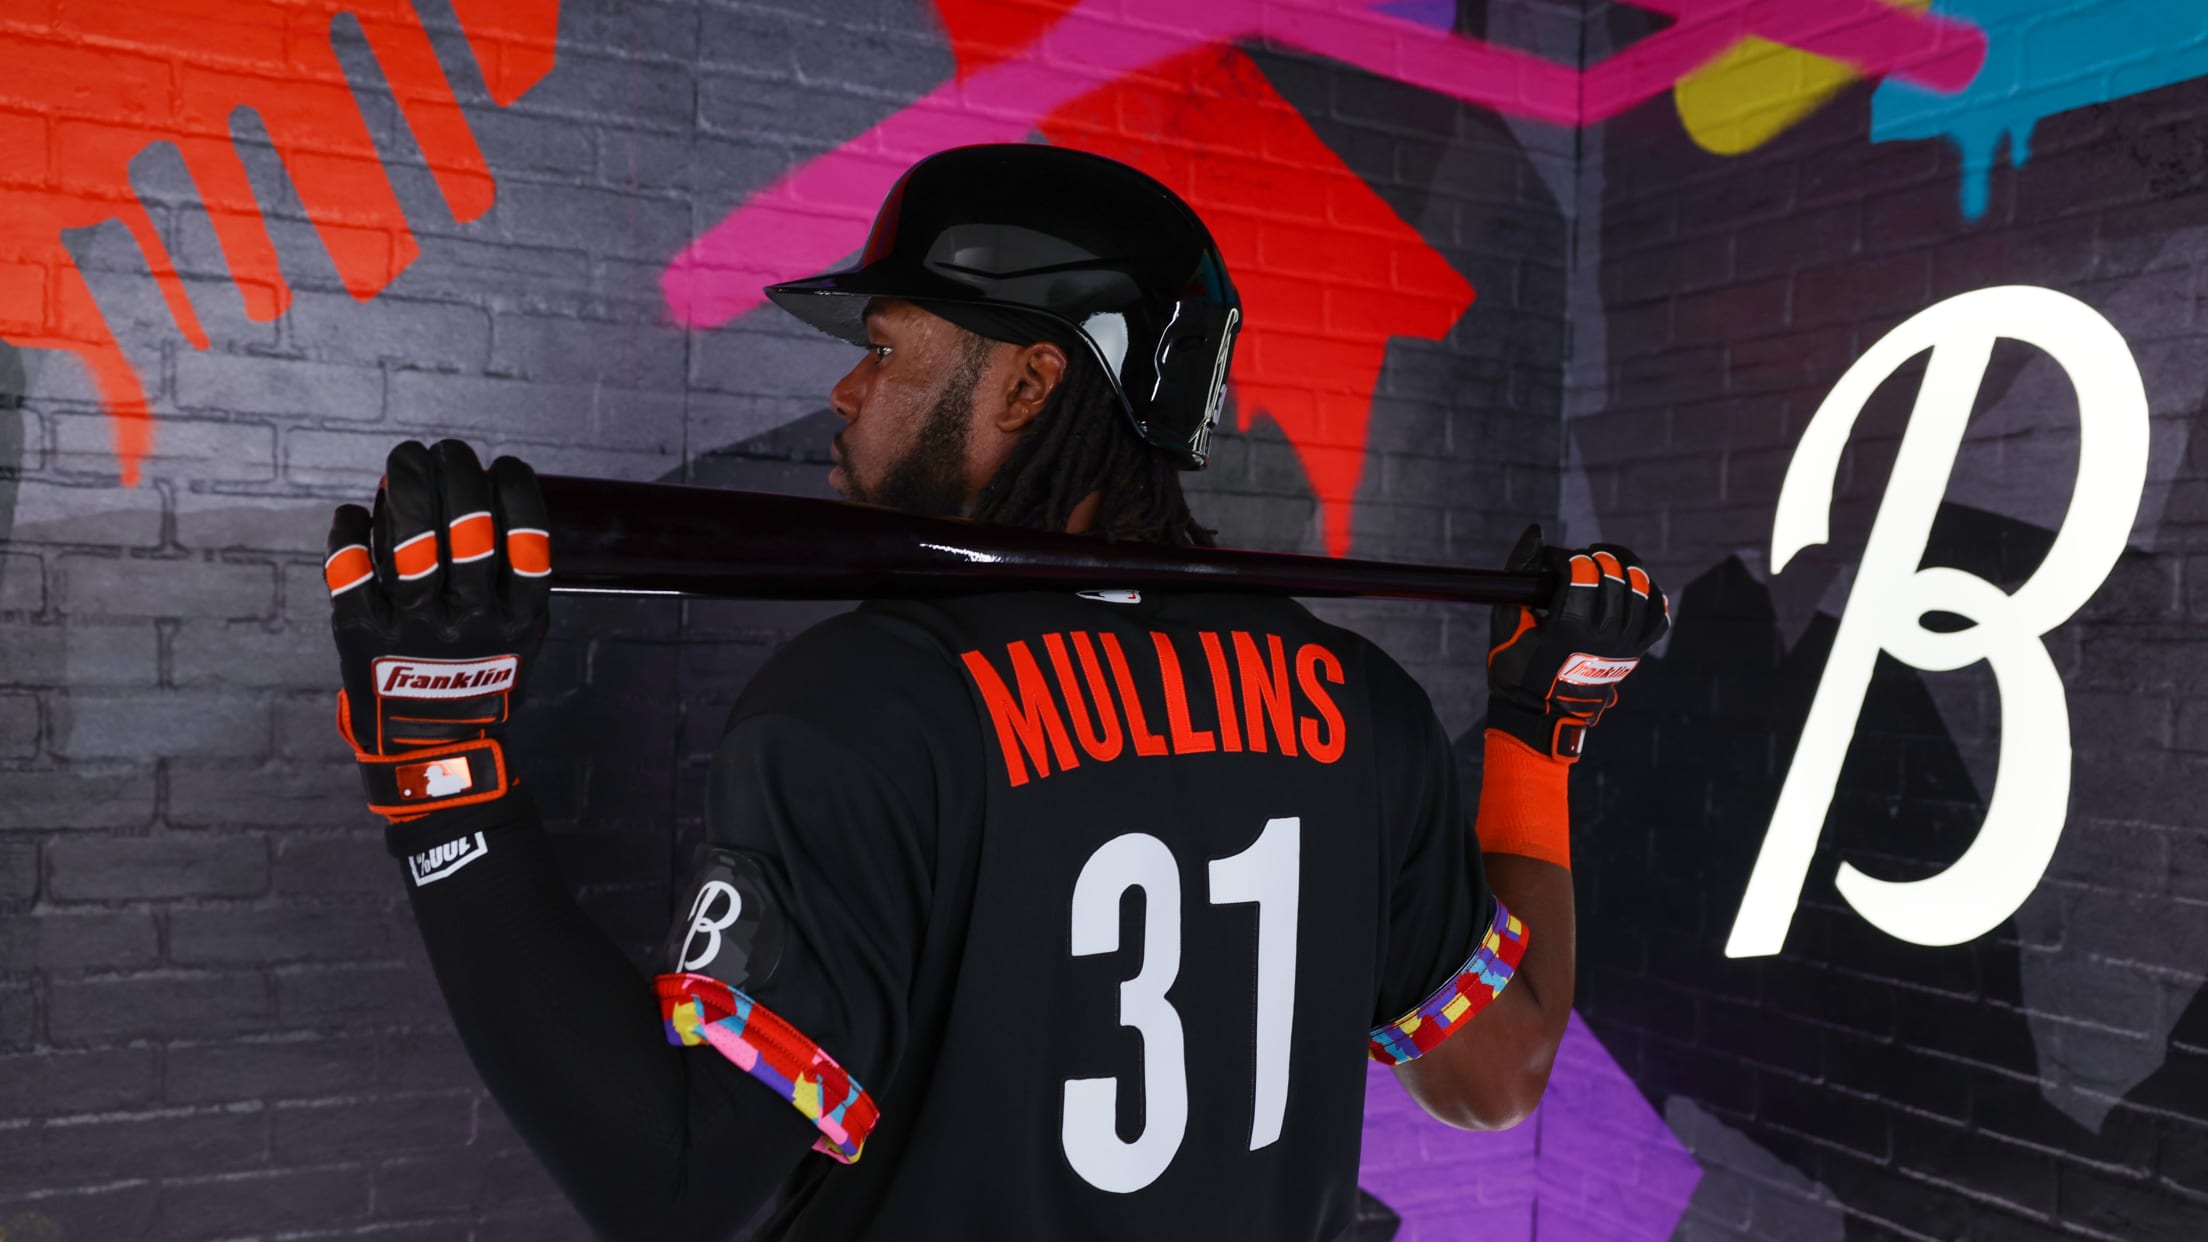 GUIDE To Complete Houston City Connect Program, MLB THE SHOW 22